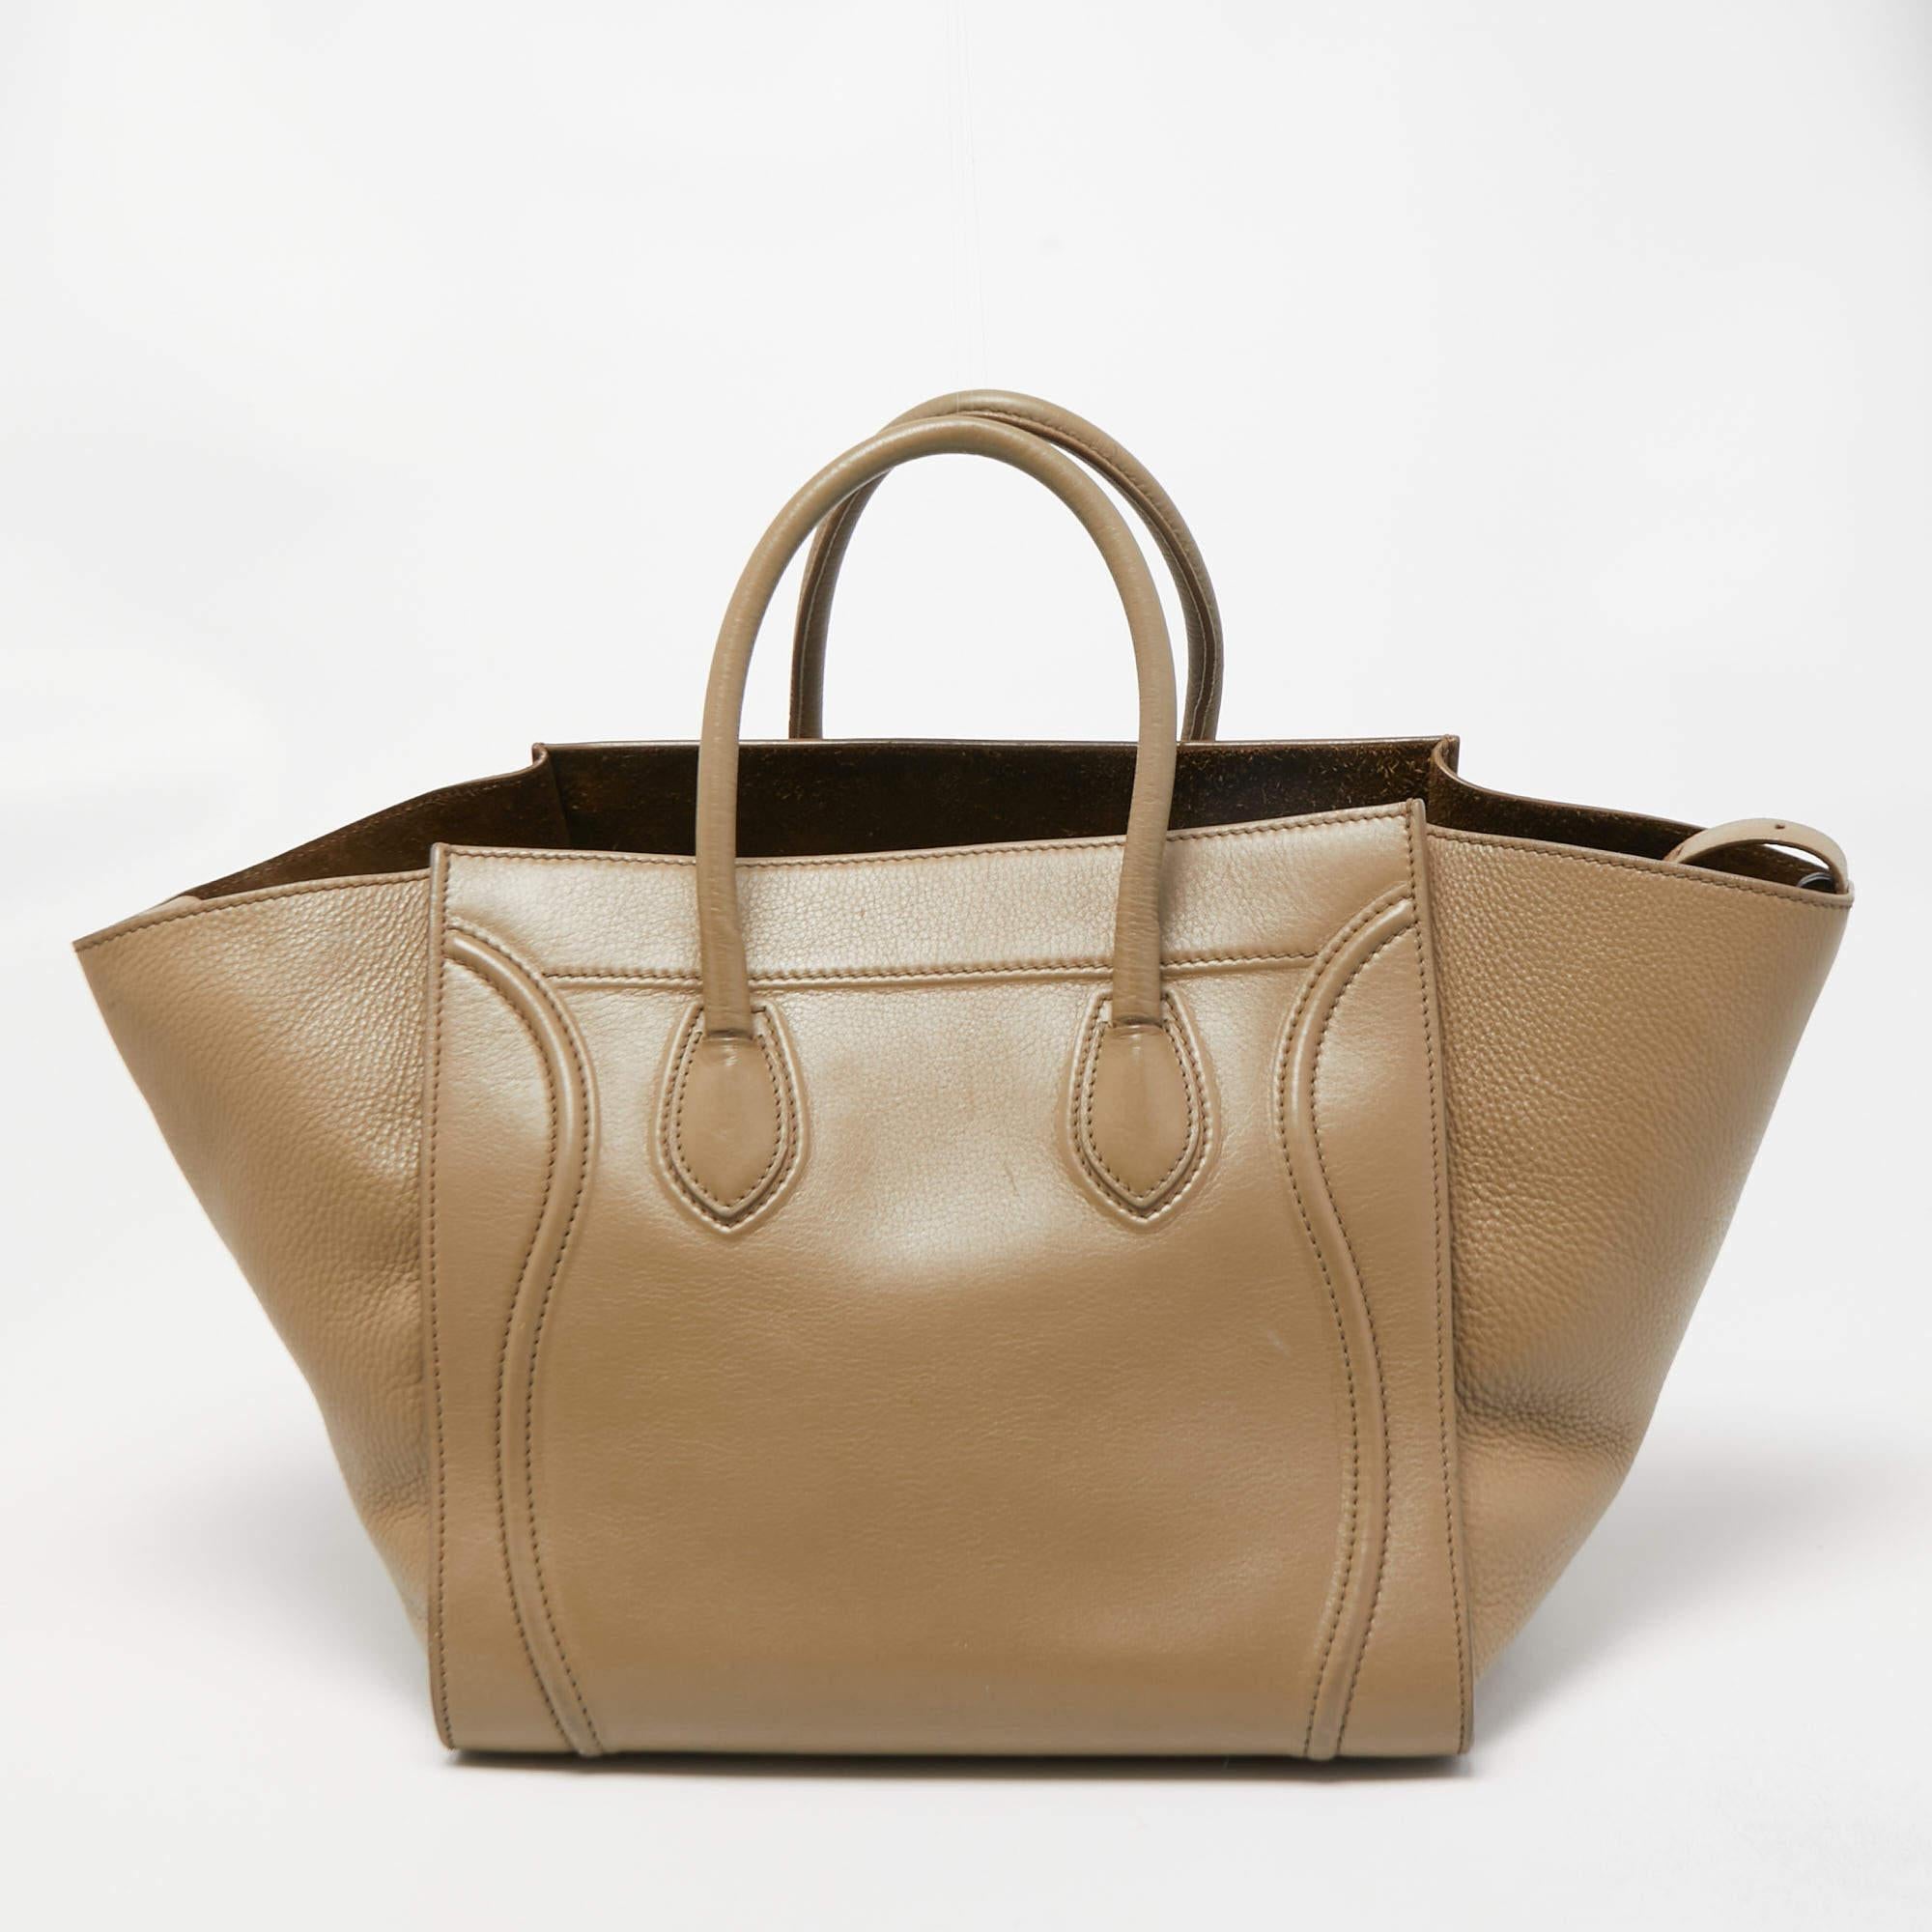 Celine released the Phantom as a newer version of its successful Luggage model. Unlike the Luggage toes, the Phantom has an open-top, wider wingspans, and a braided zipper pull. We have here the one in leather. It has two top handles, a beige shade,